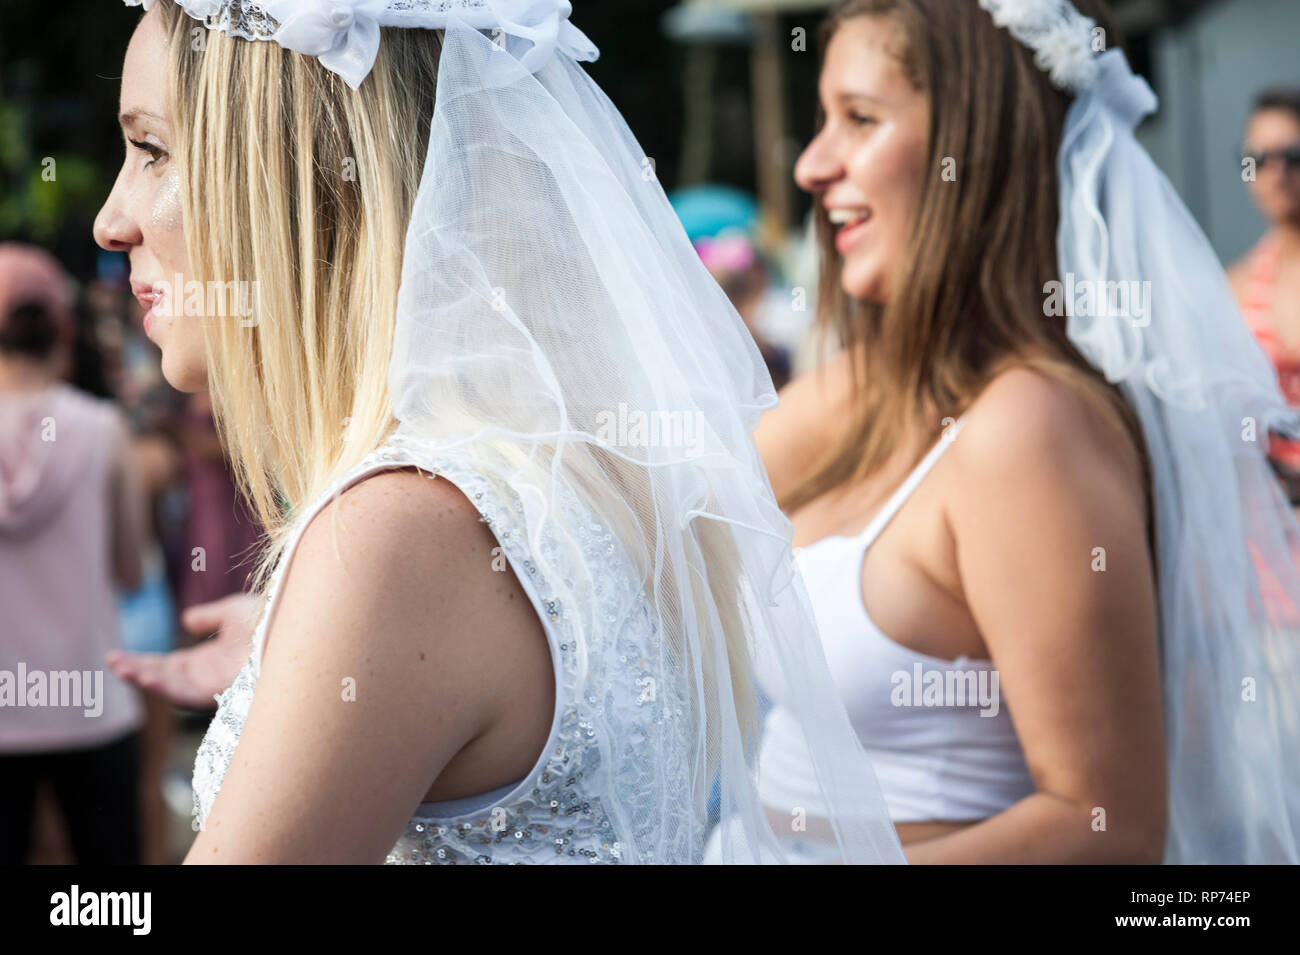 RIO DE JANEIRO - FEBRUARY 11, 2017: Young Brazilian women celebrate Carnival in bridal costumes at an afternoon street party in Ipanema. Stock Photo